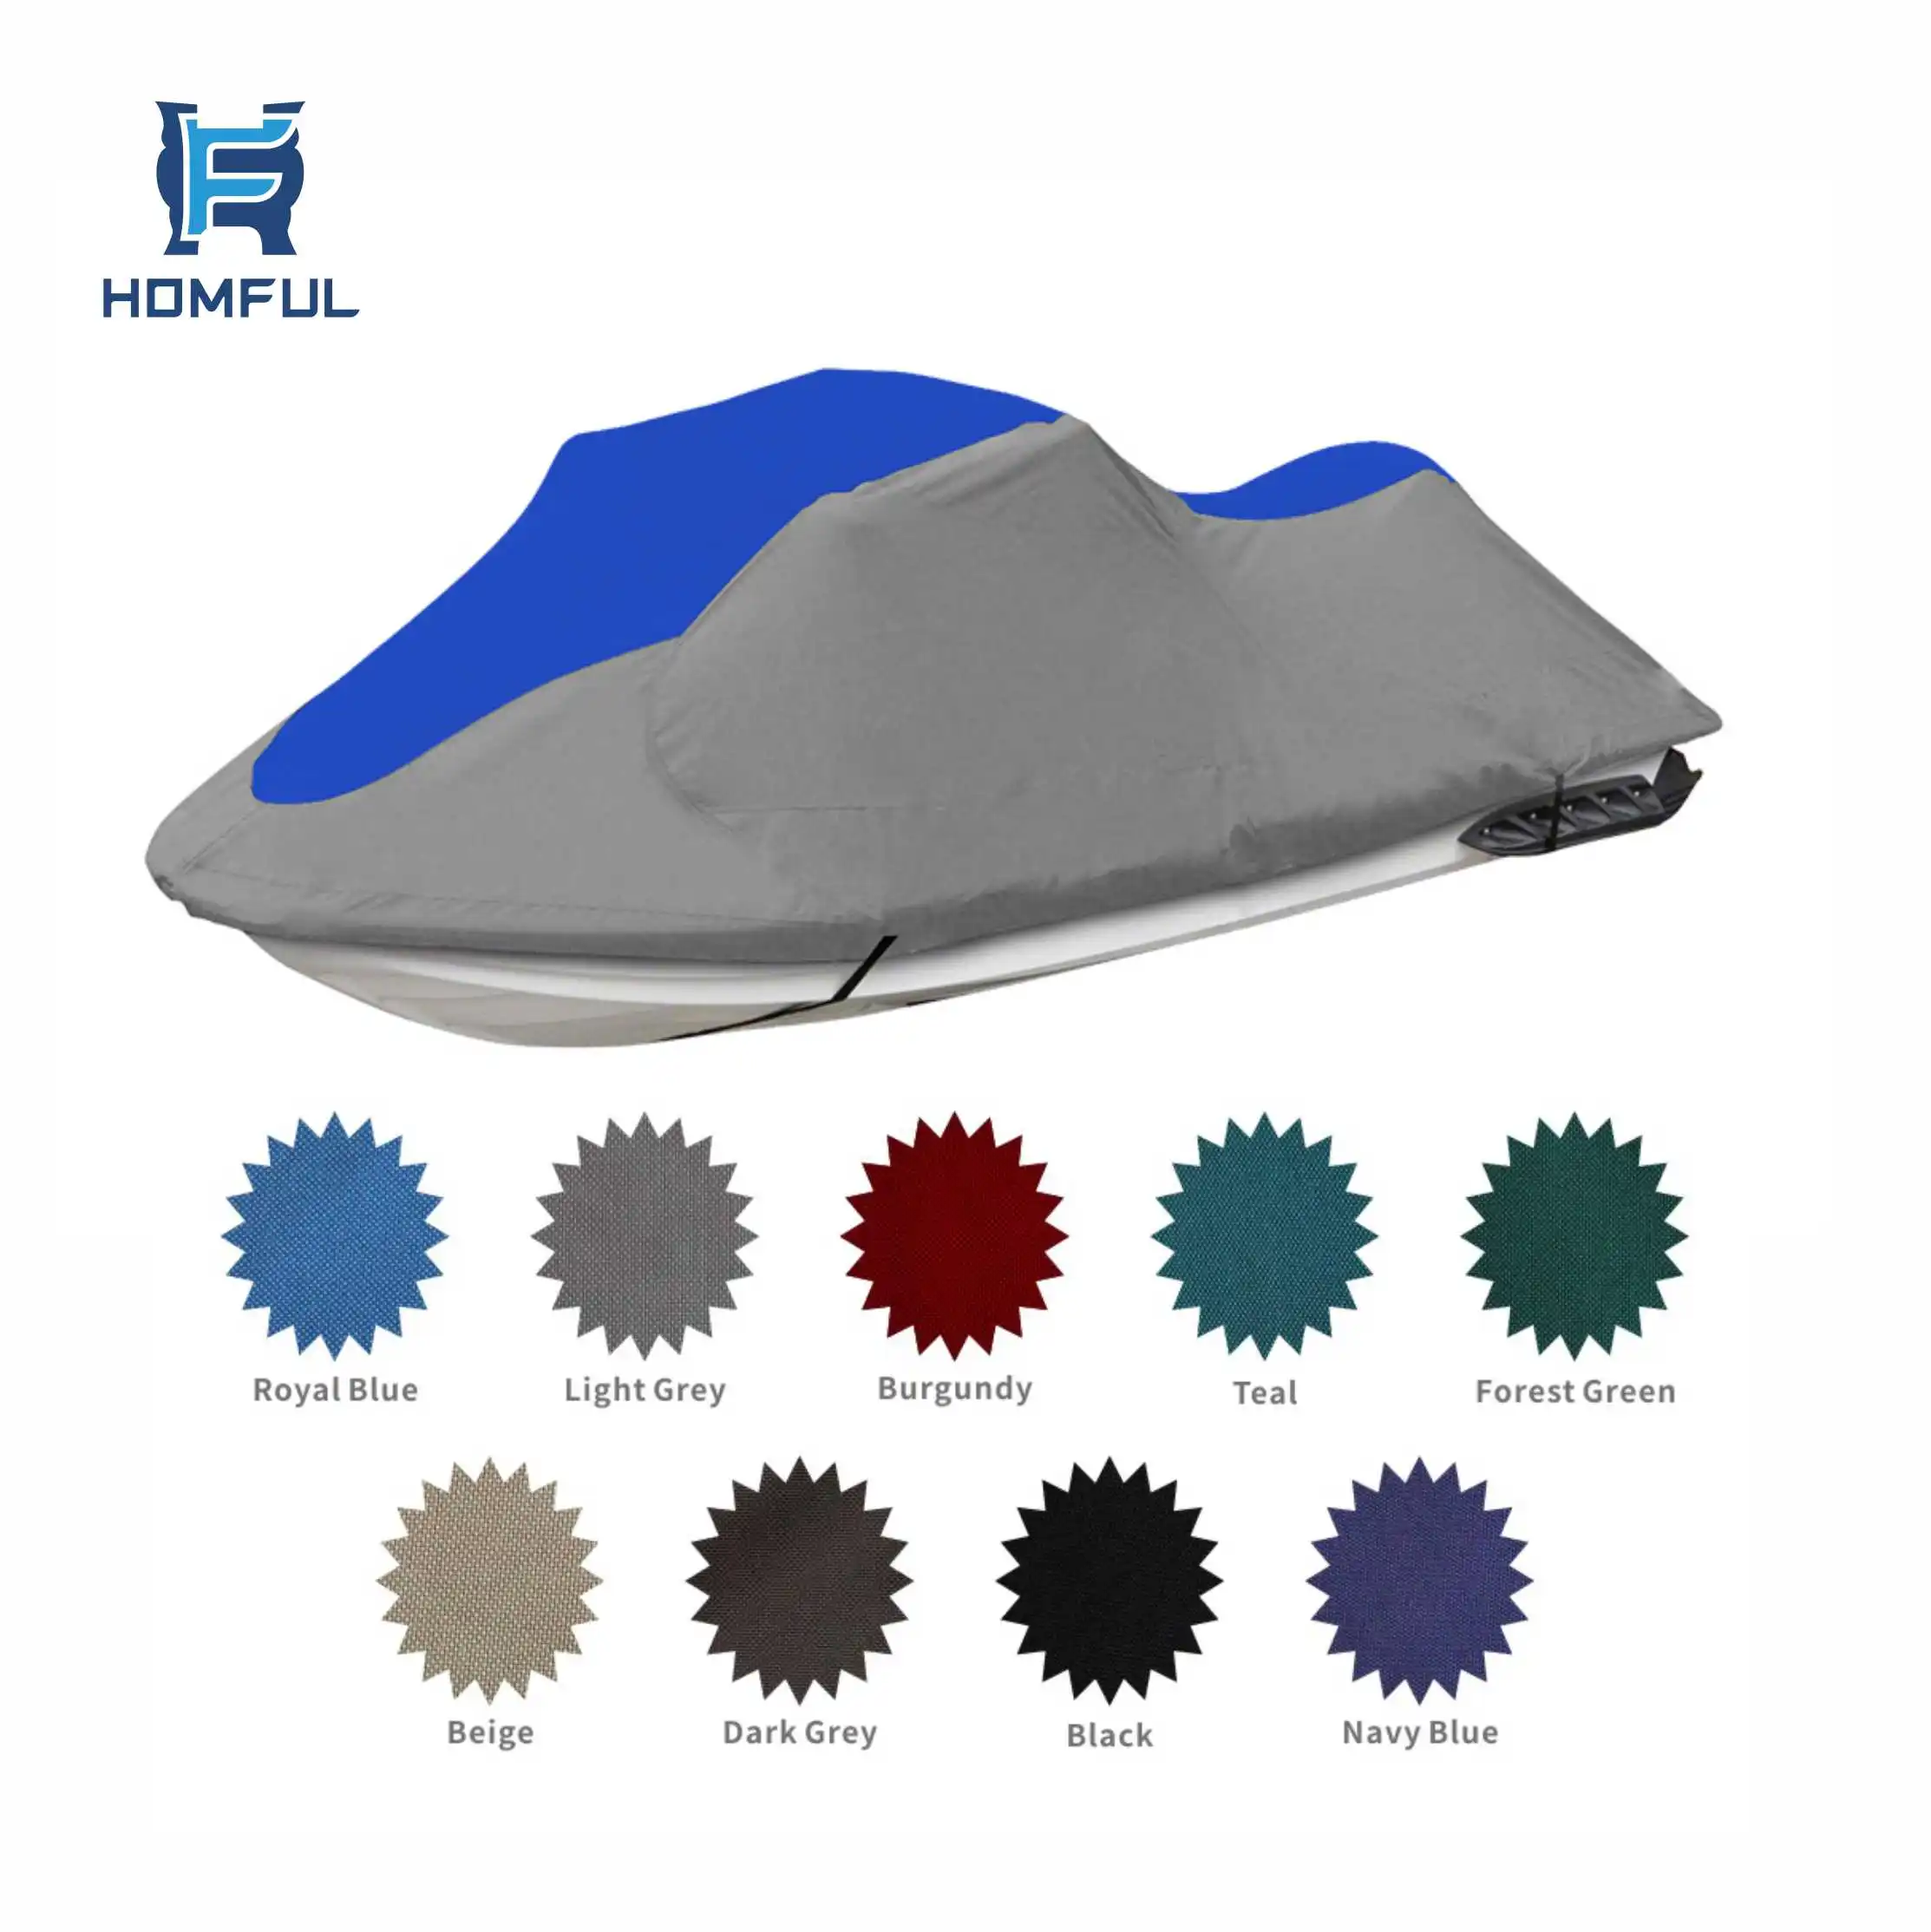 HOMFUL Breathable Watercraft Waverunner Cover Jet Ski Boat Pwc Cover Waterproof Boat Cover